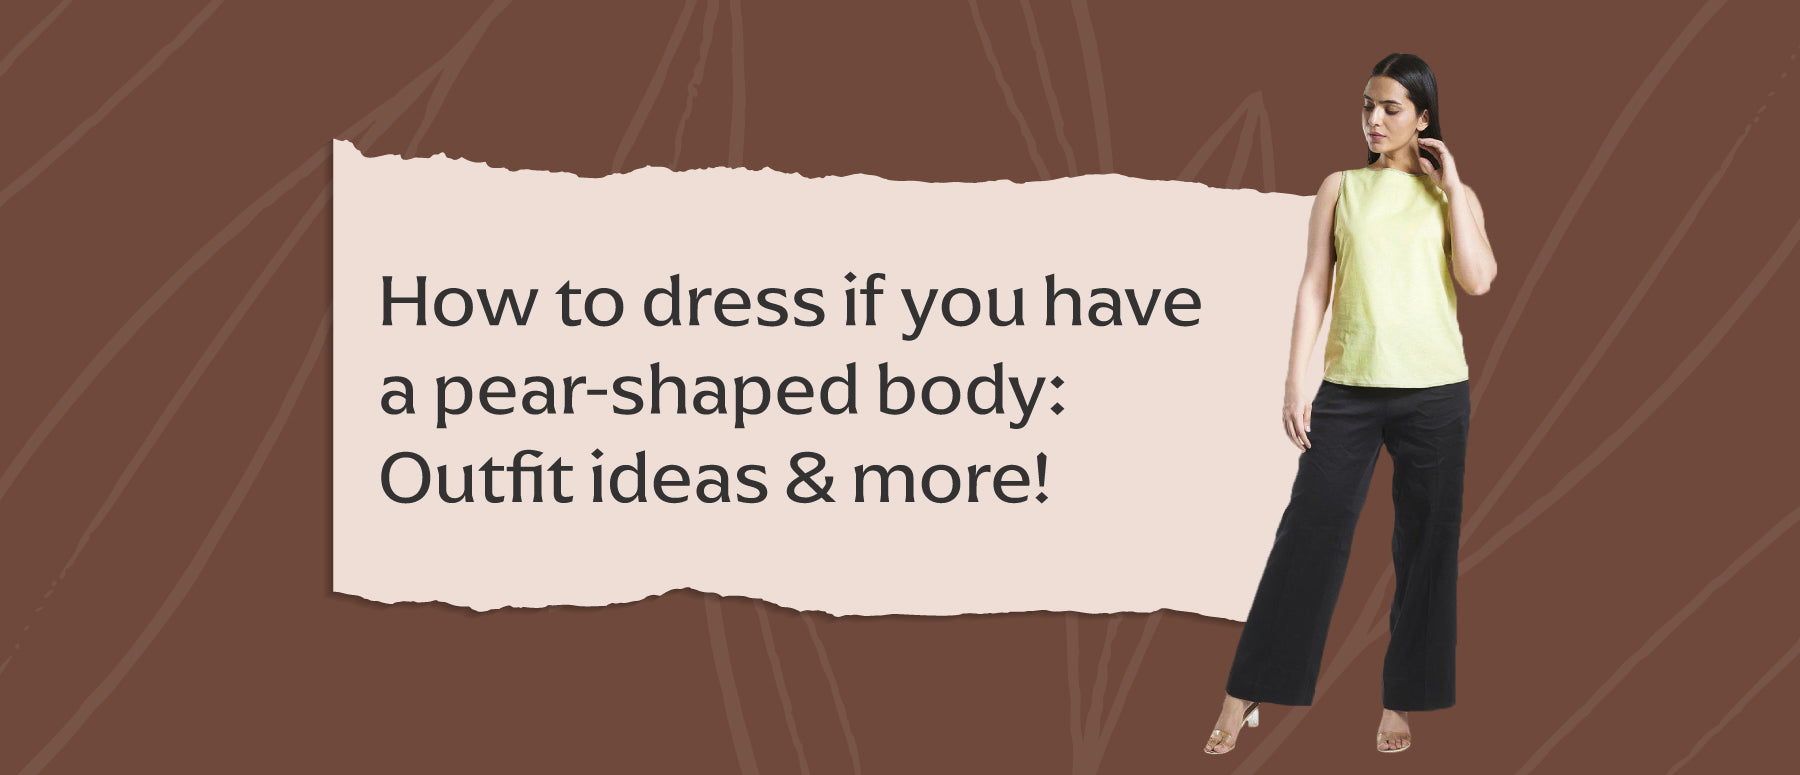 How To Dress A Pear Body Shape: Outfit Ideas & More! - Power Sutra